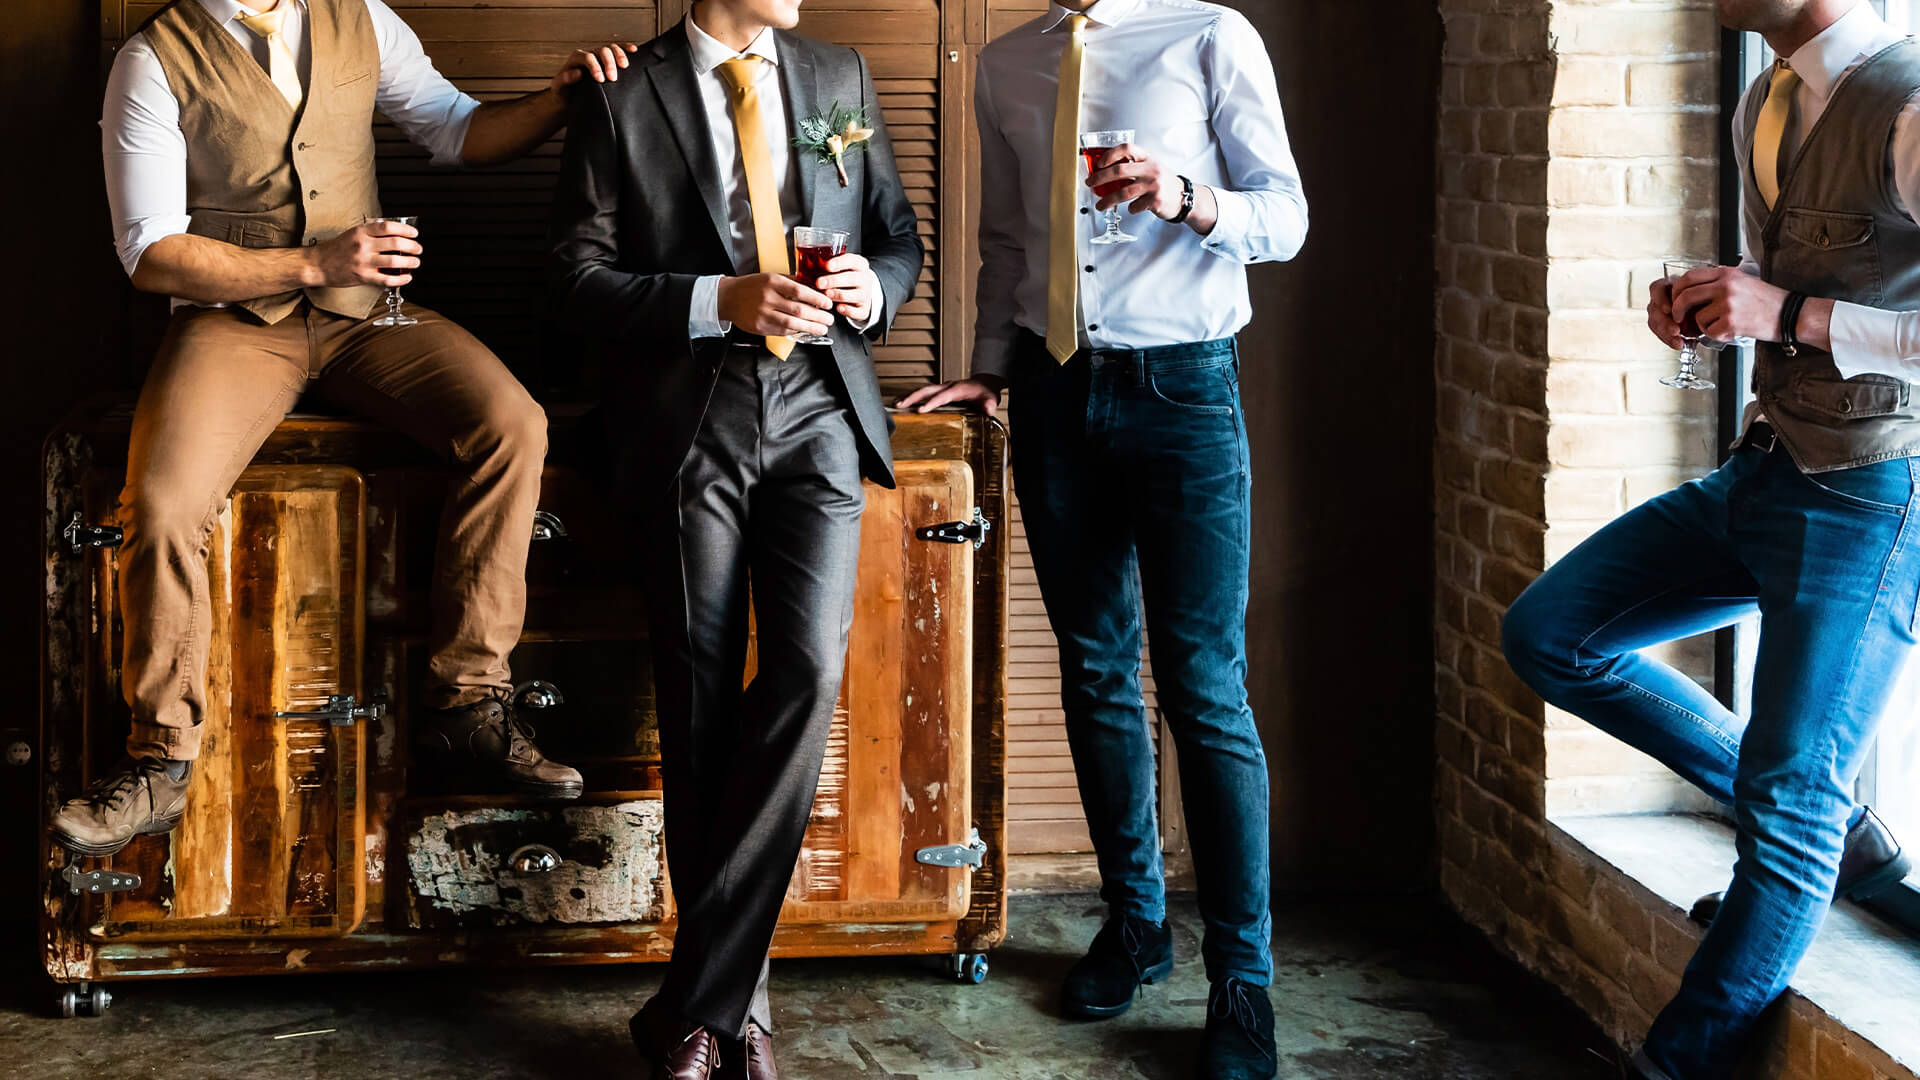 Men wearing wedding suits. Some are more casual and paired with jeans, and others more formal